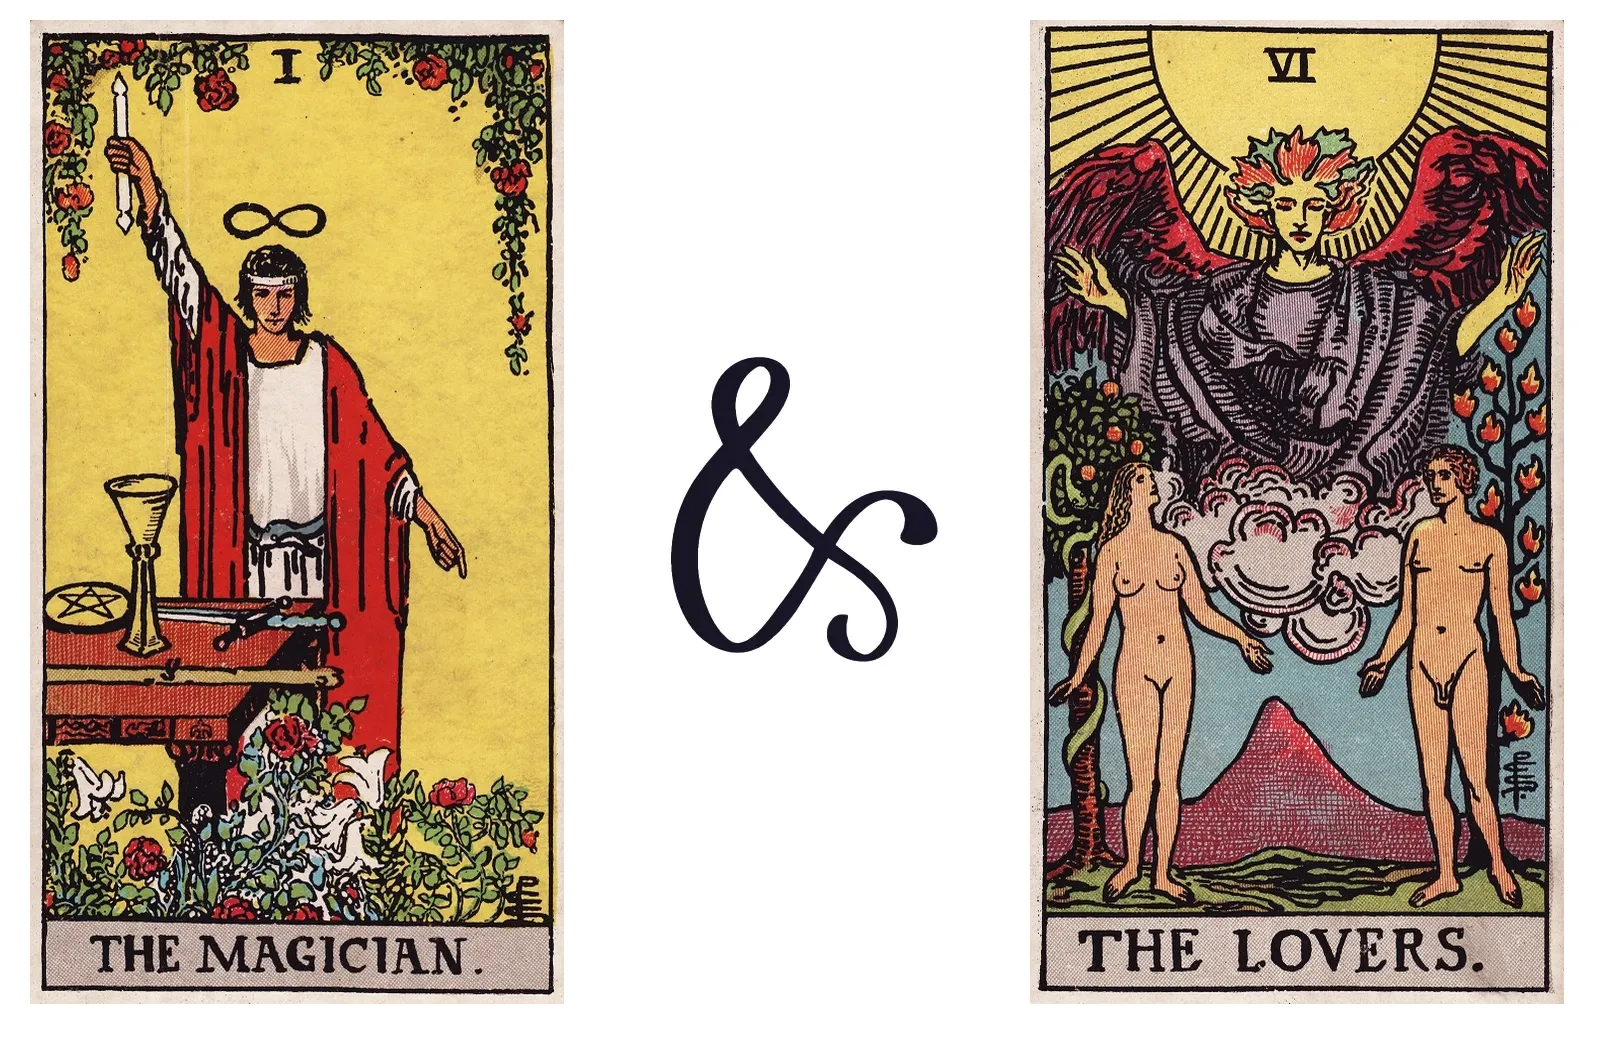 The Magician and The Lovers